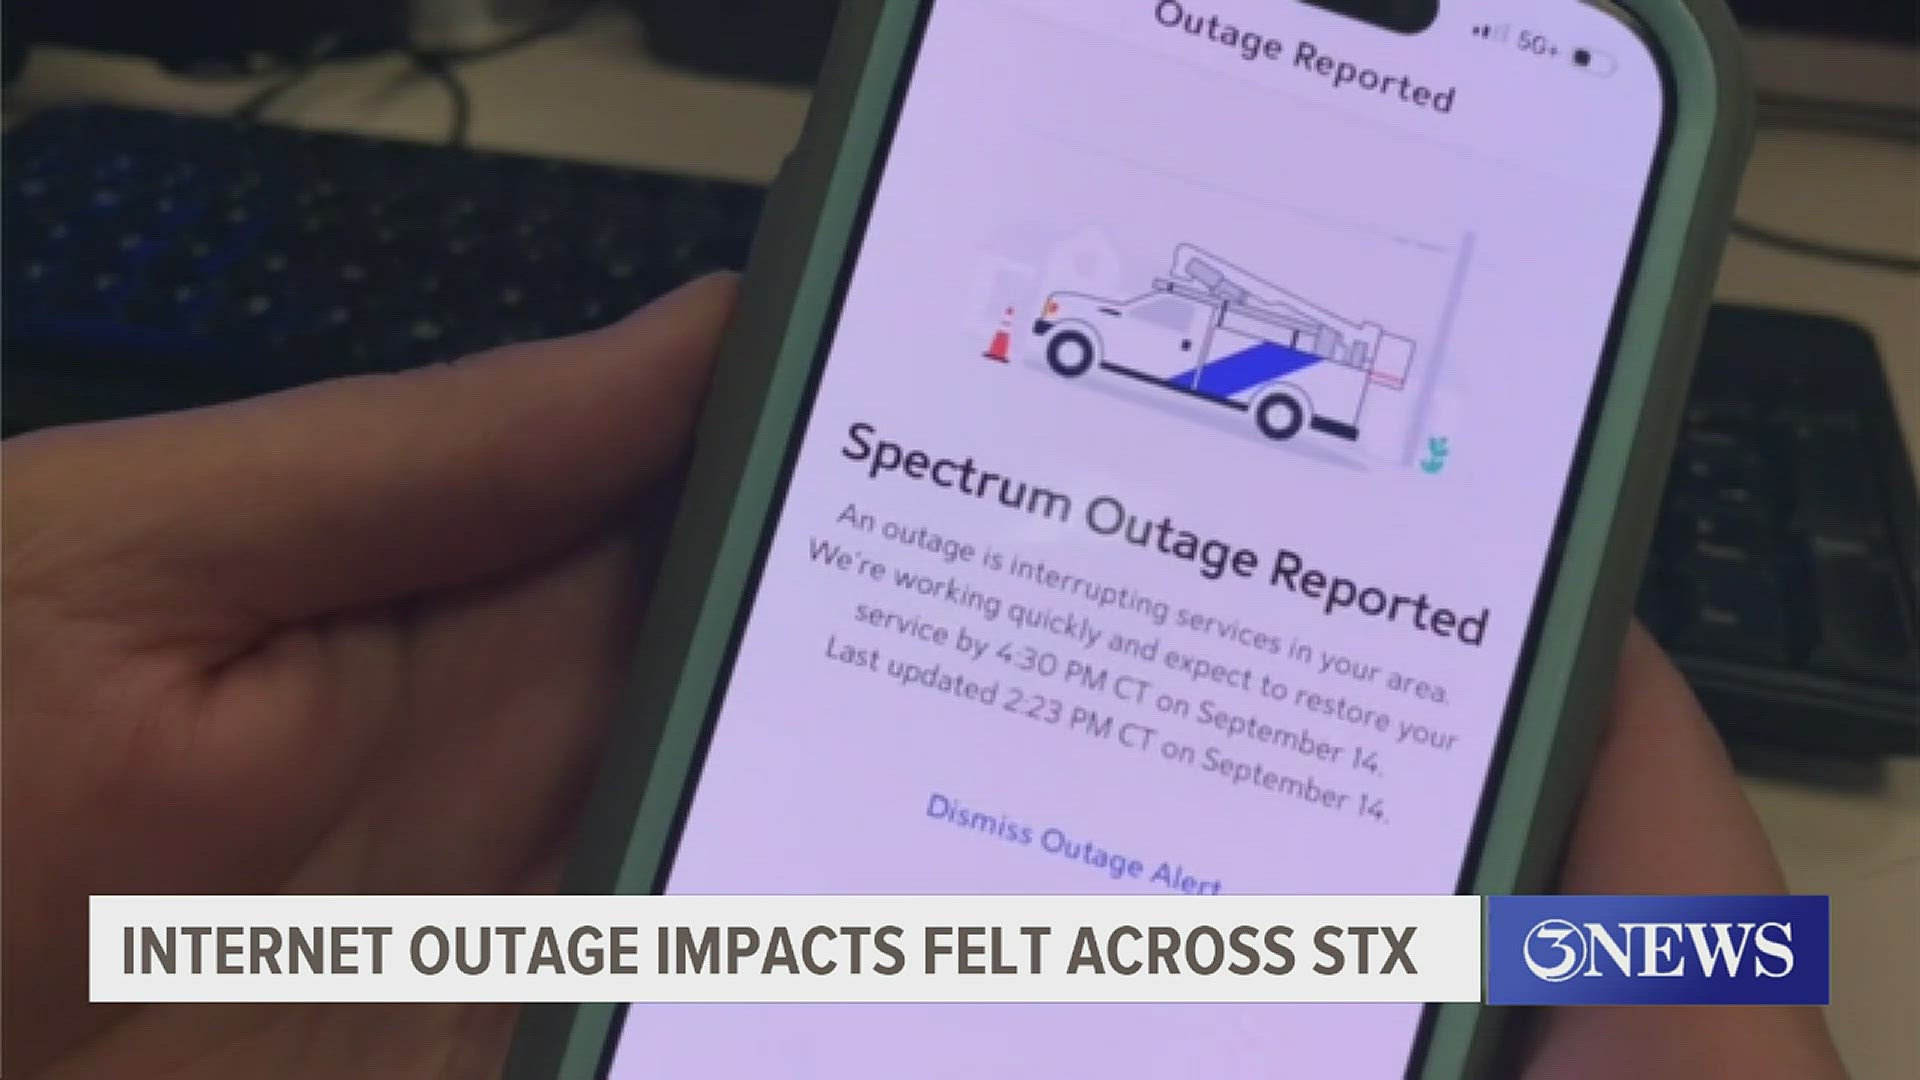 Spectrum Internet Outage Email: How to Stay Connected During Service Interruptions